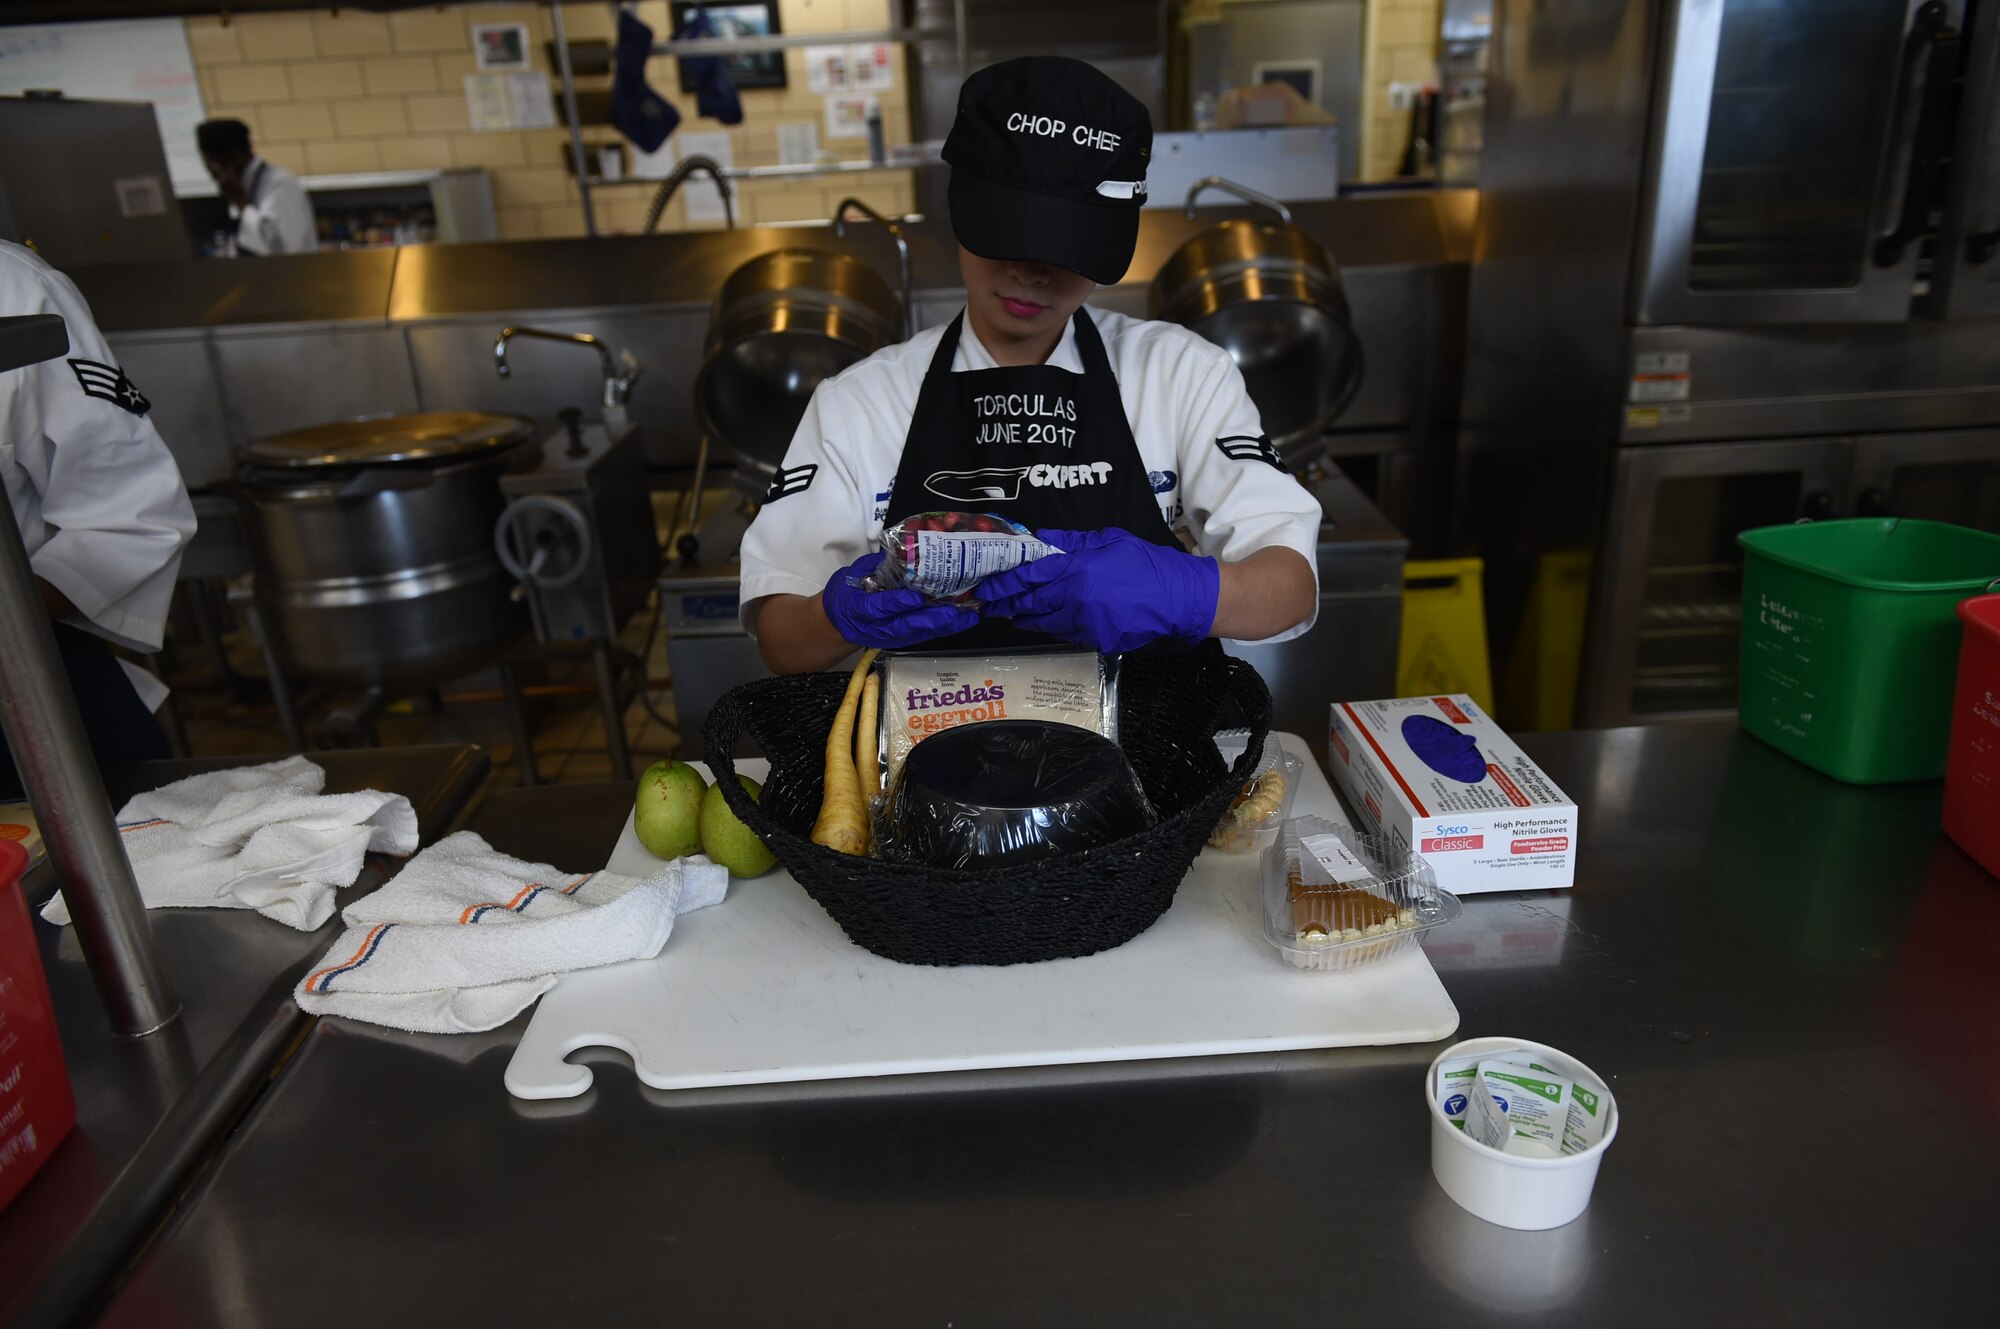 U.S. Air Force Airman 1st Class Michelle Vi Torculas, a food services specialist assigned to the 97th Force Support Squadron, looks over the ingredients she was given for the 2017 Chopped Chef Challenge, November 28, 2017, at Altus Air Force Base, Okla. The competition included five elite members of the Hangar 97 cooking staff. Torculas won the region two 2018 Arthur J. Myers Food Service Excellence Award for her hard work in events like this and in her career. (U.S. Air Force photo by Senior Airman Kirby Turbak)